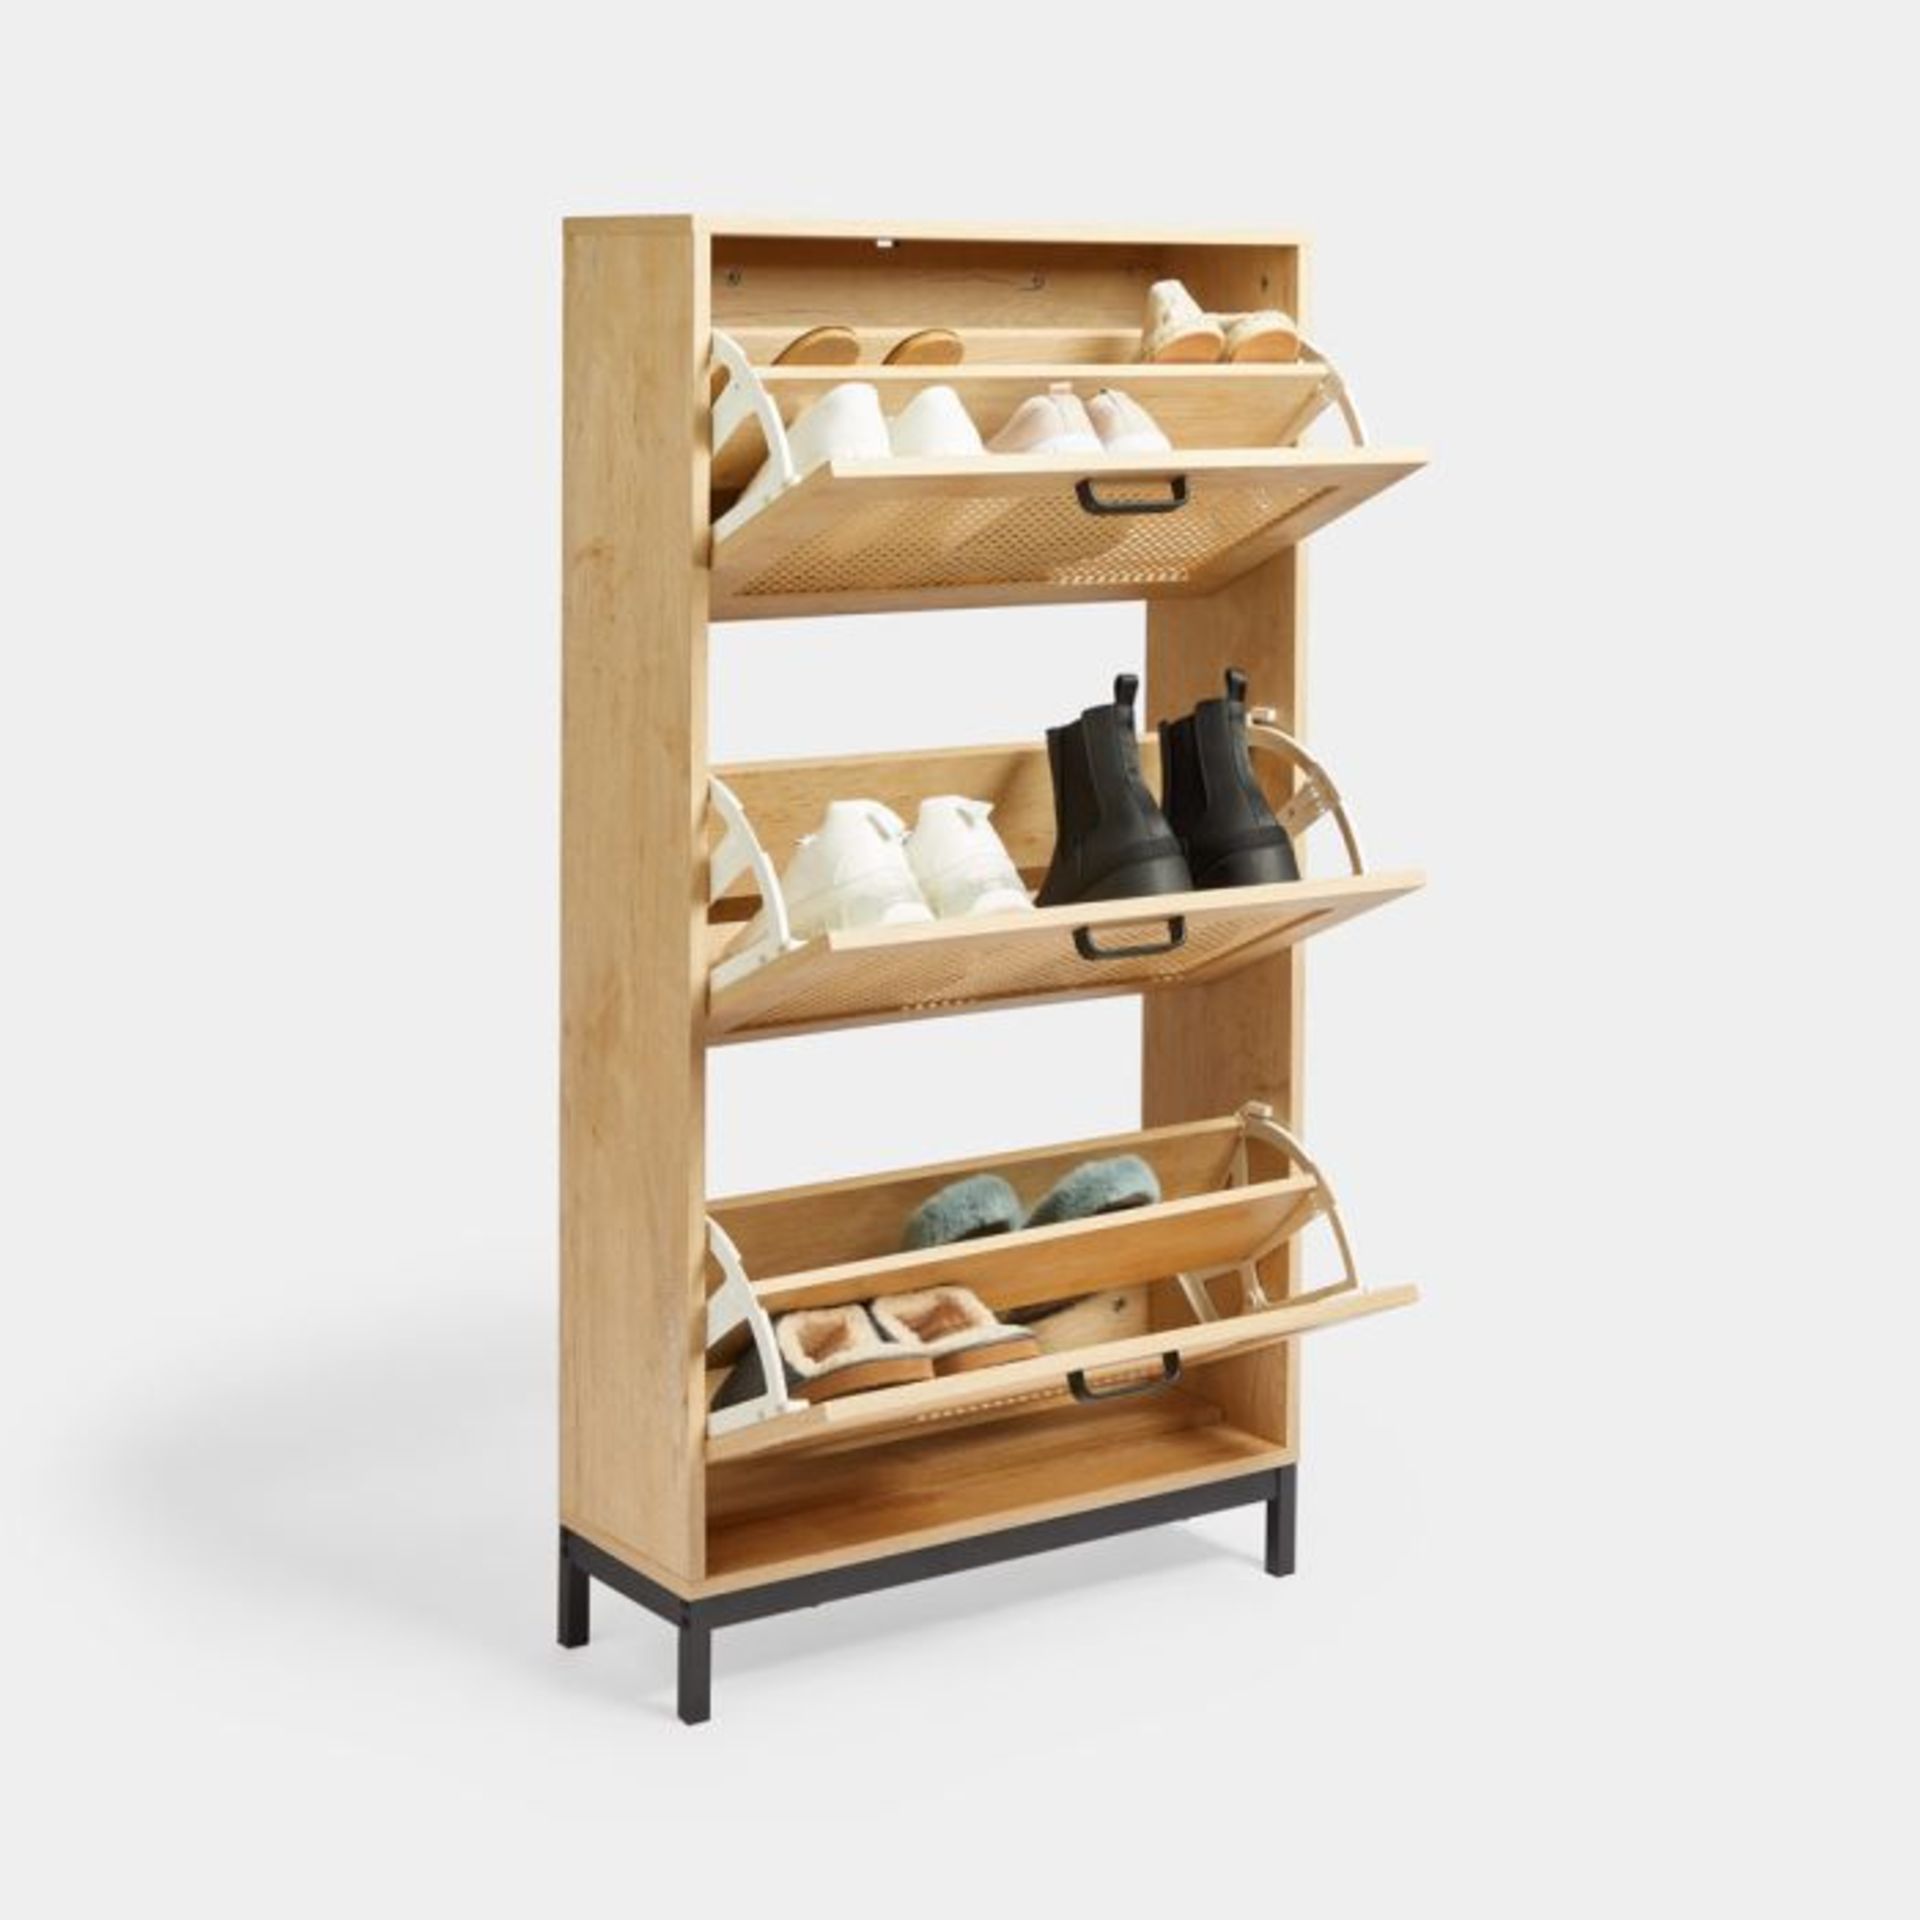 Lena Rattan Shoe Storage Cabinet. - ER33. Made with a unique industrial-modern aesthetic, the Lena